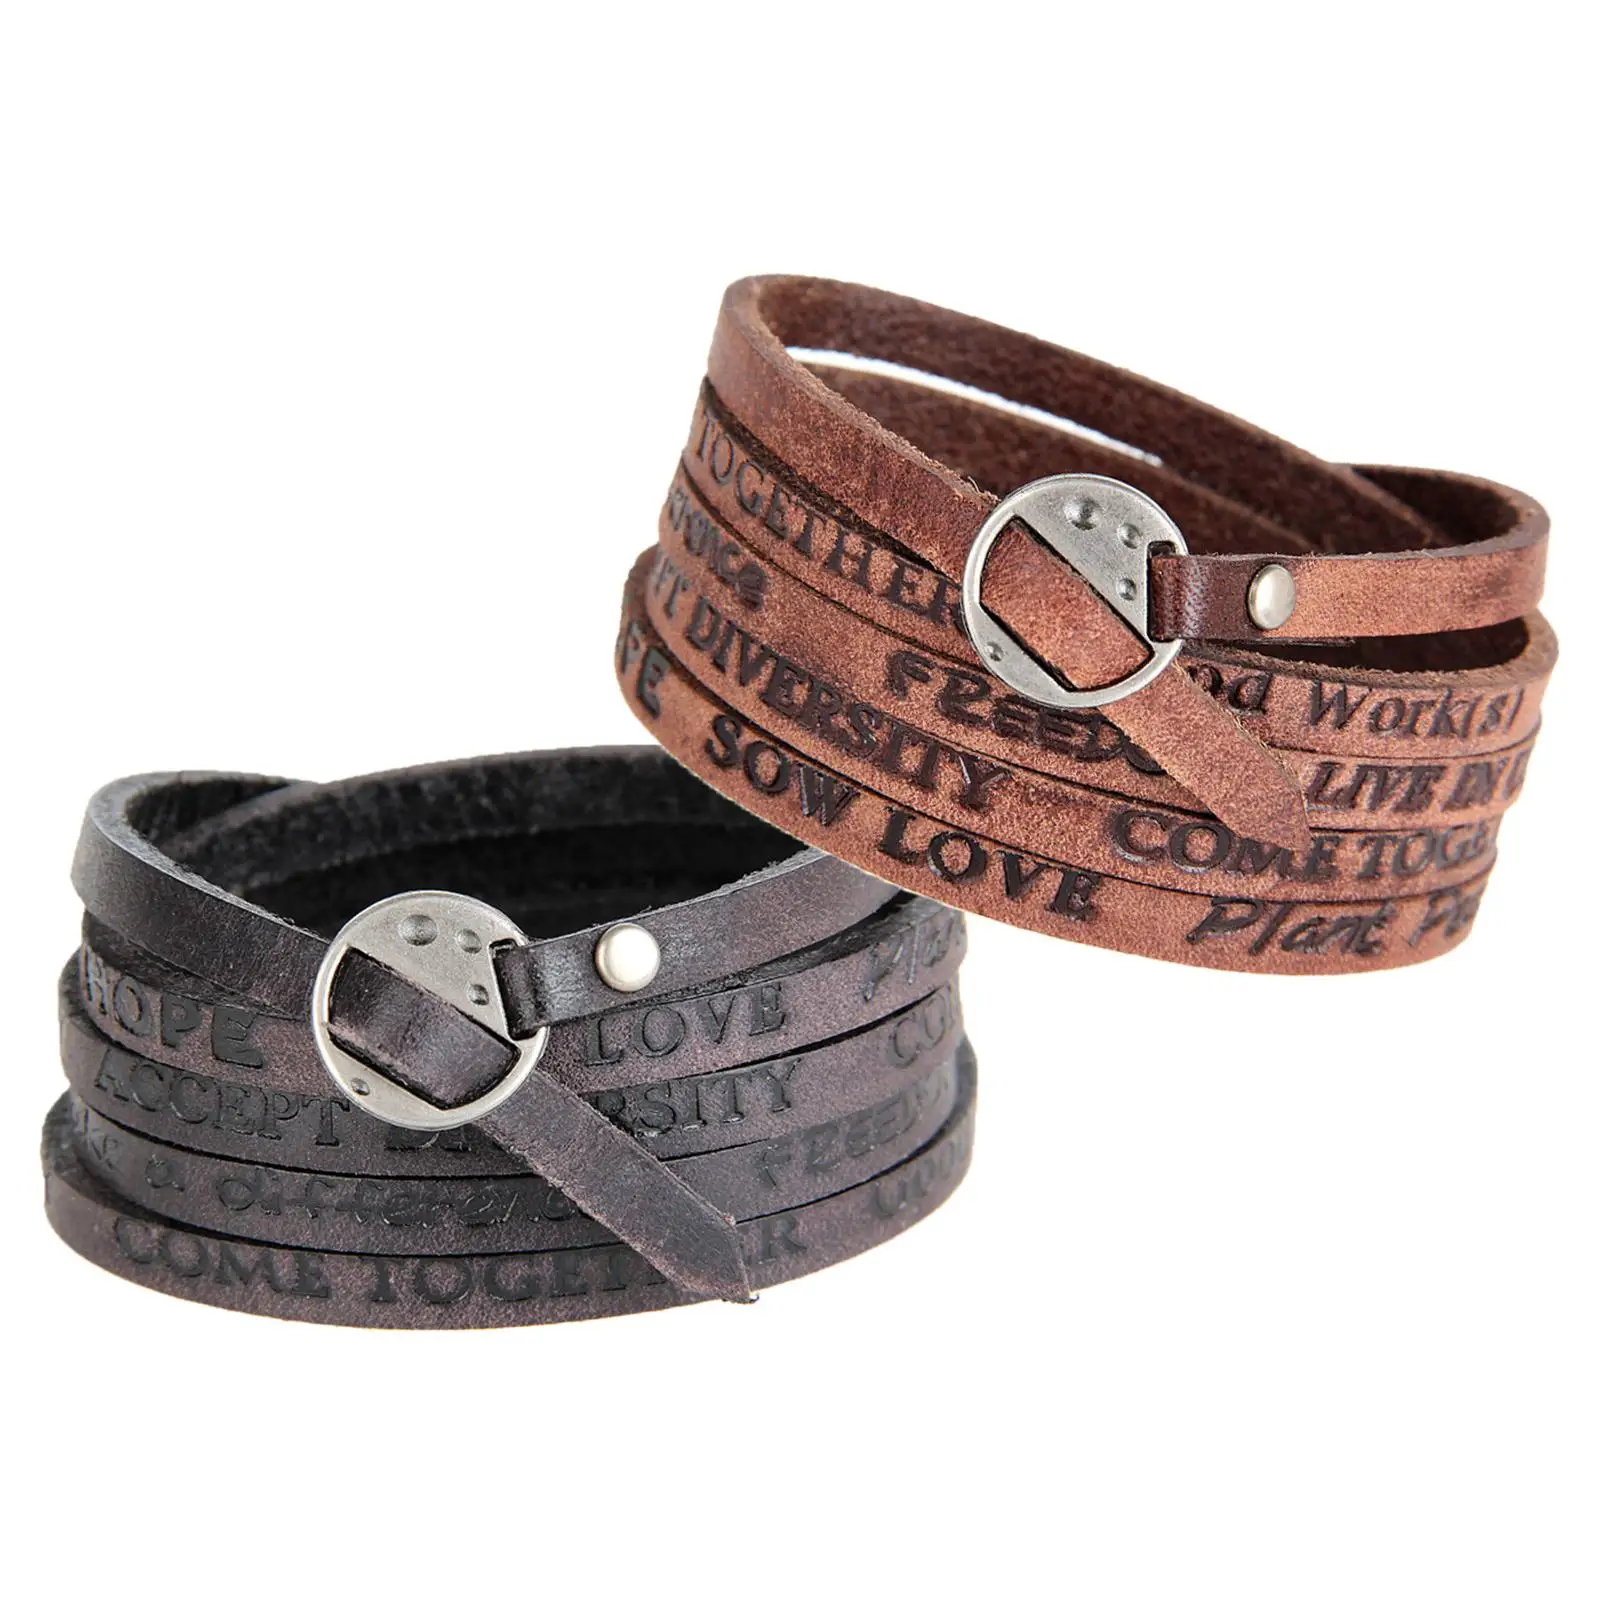 PU Leather Wide Bracelet Punk Gifts Jewelry Vintage Adjustable Cuff Bangles for business Clothing Friendship Teen Men